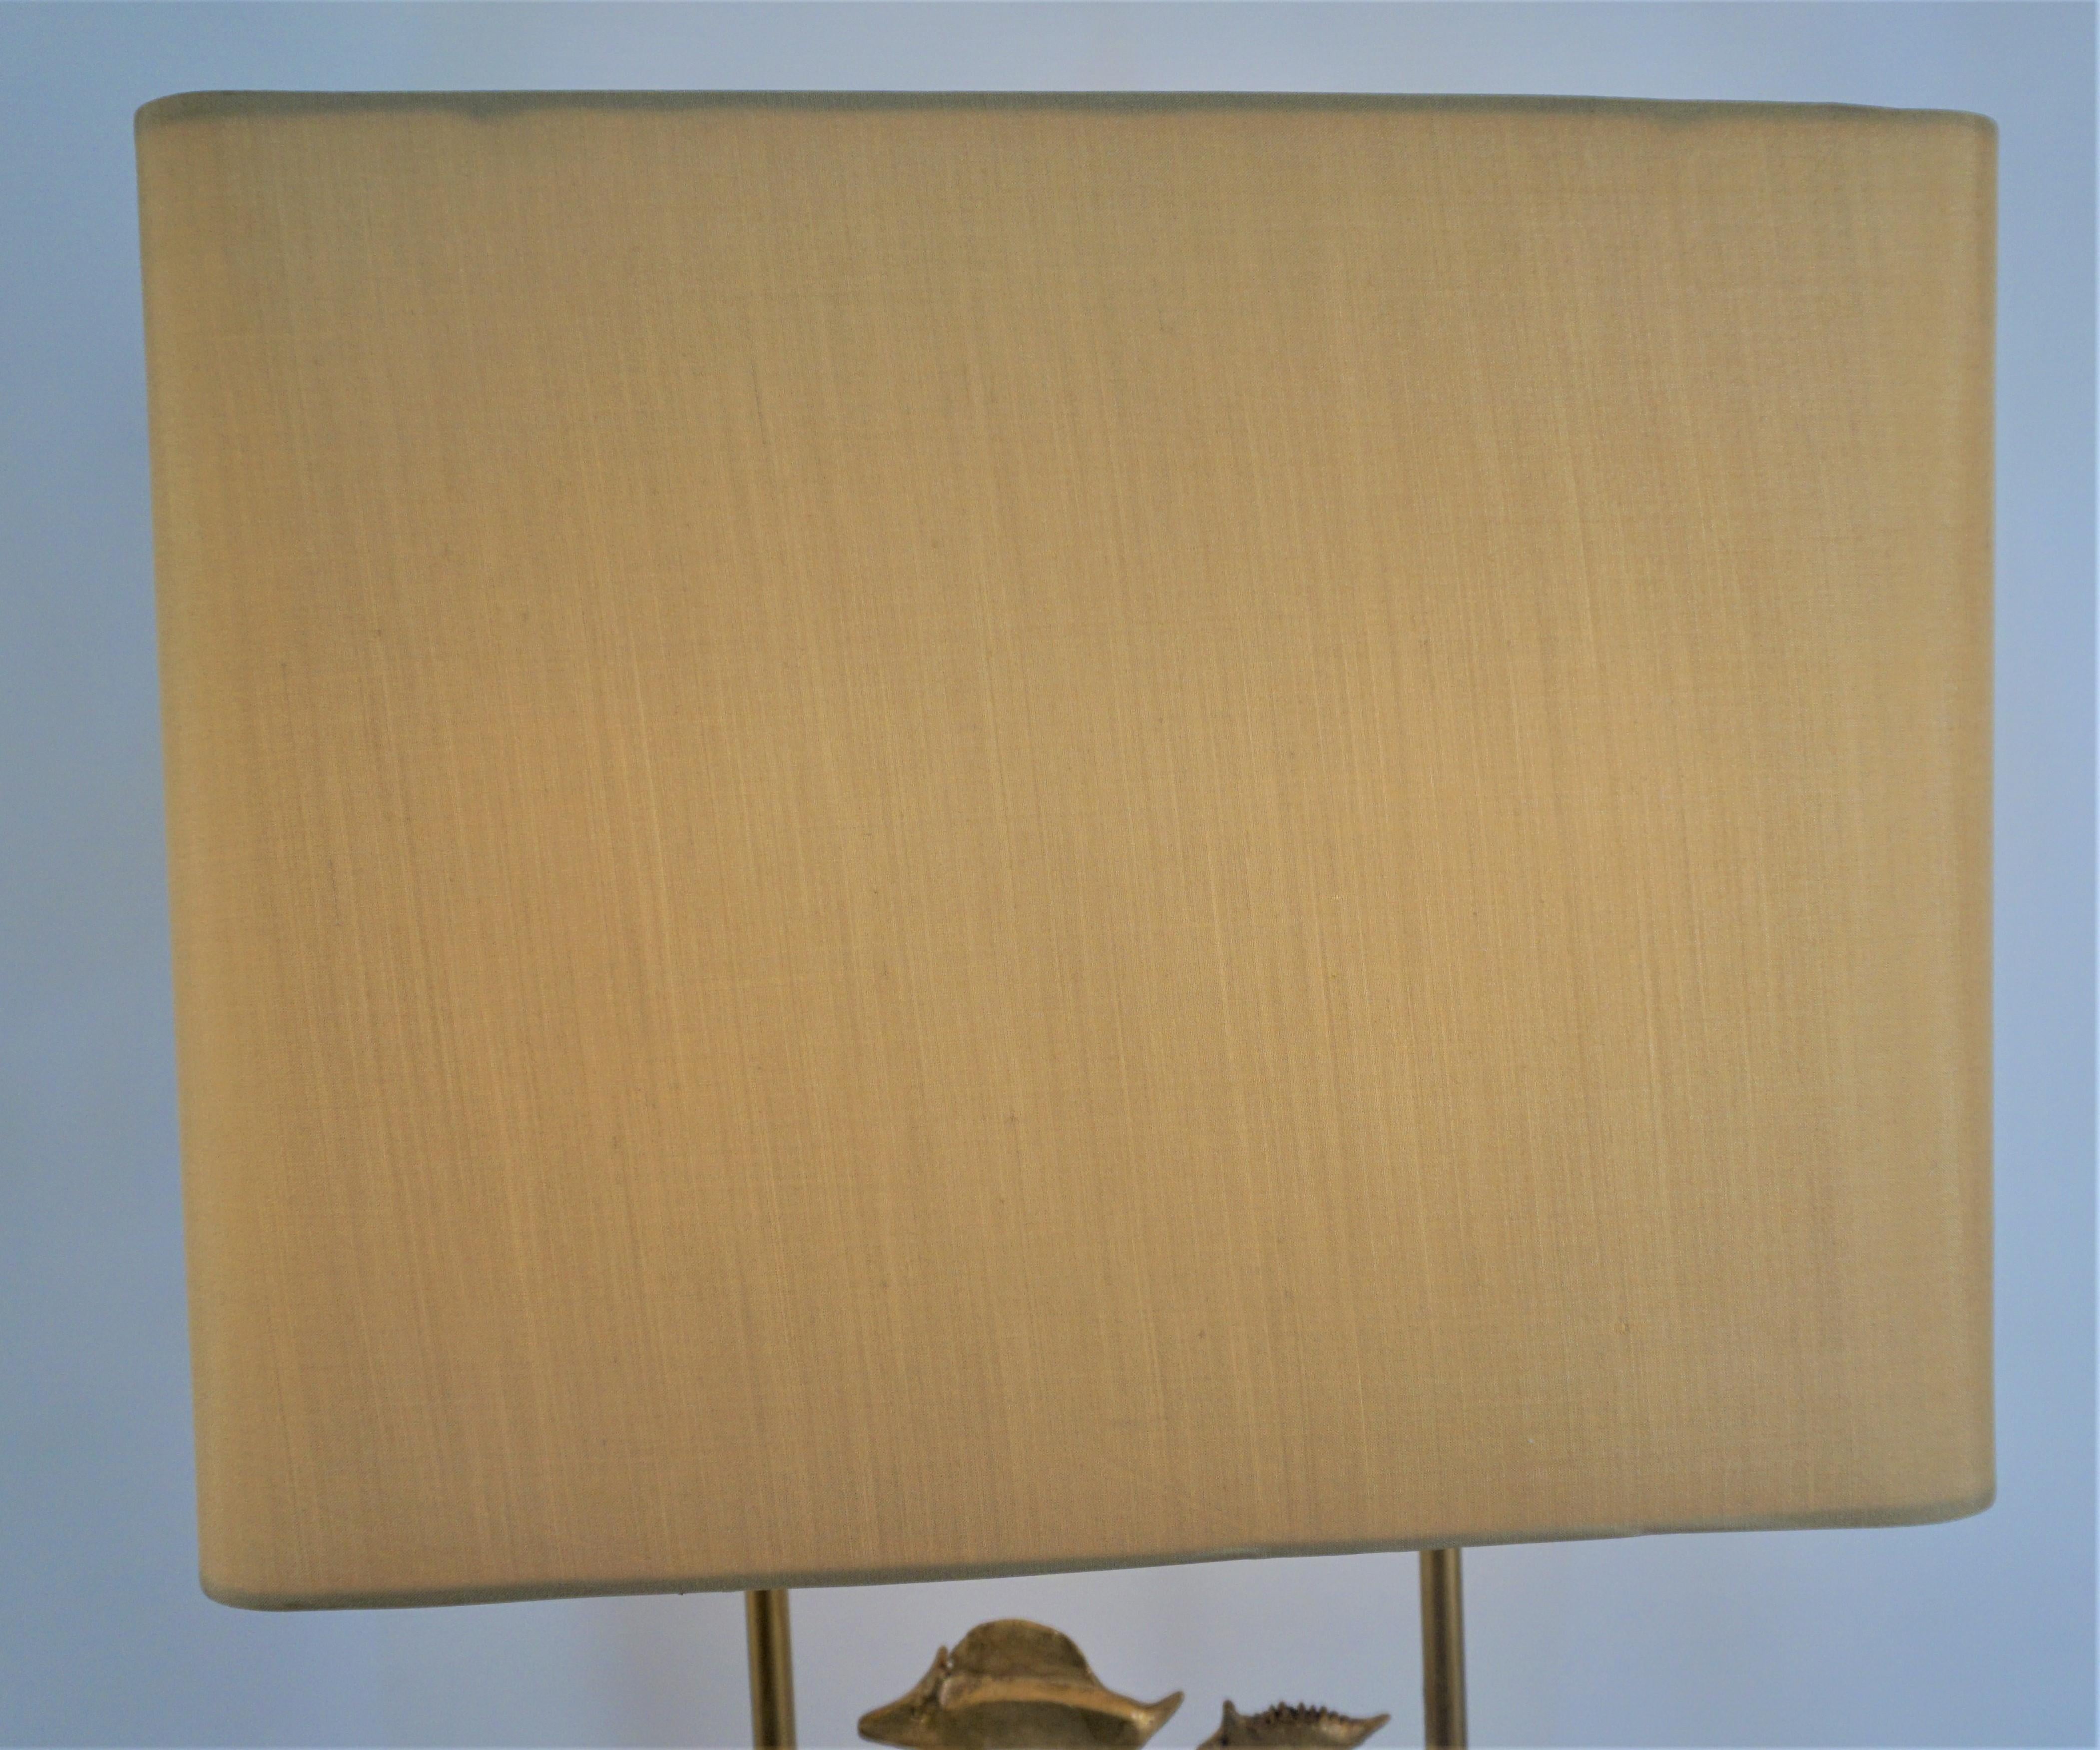 Late 20th Century Pierre Casenove for Fondica Gilt Metal 1990 Table Lamp For Sale